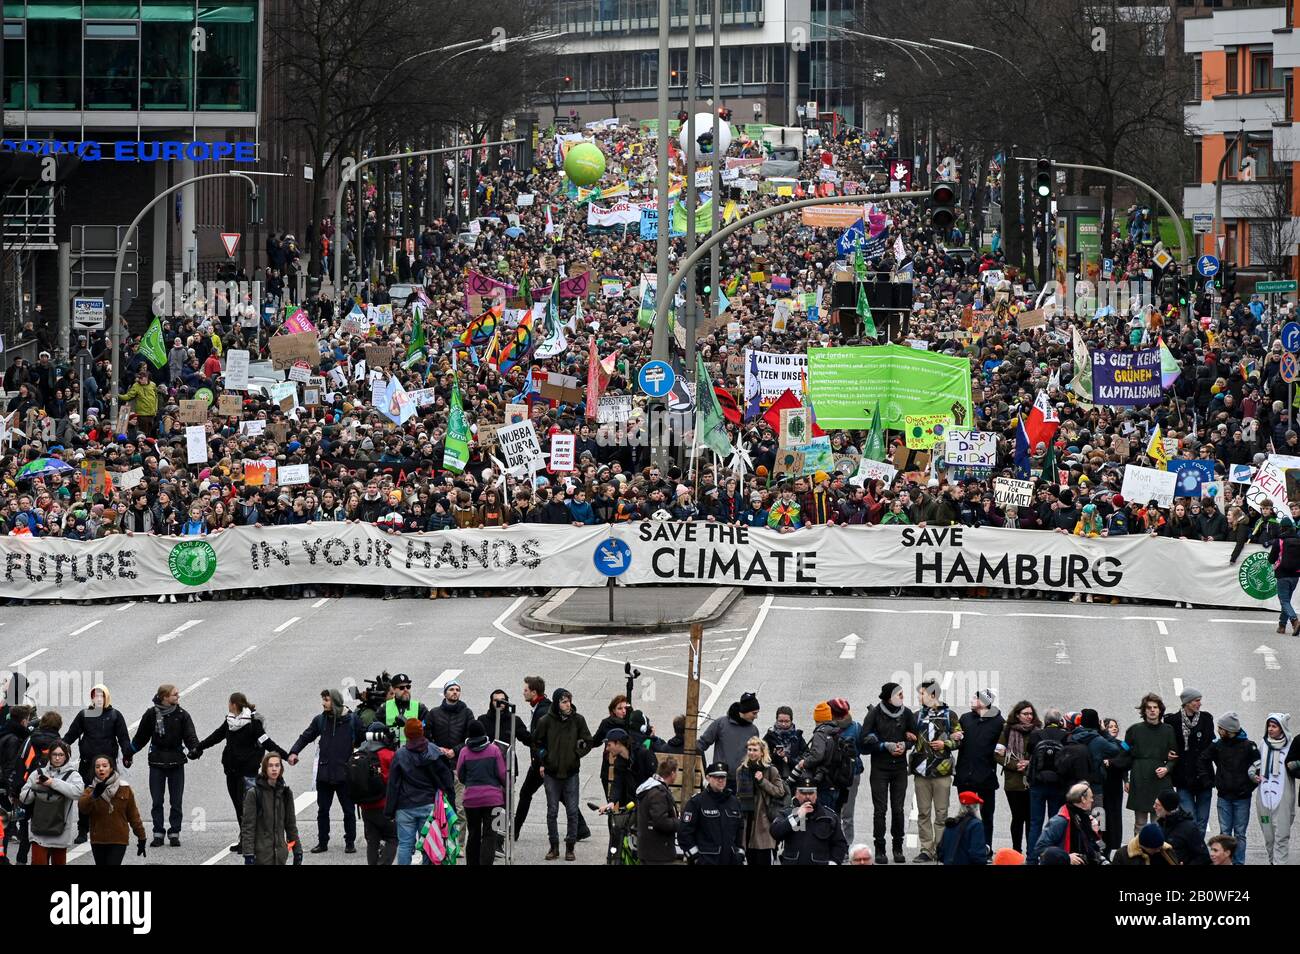 GERMANY, Hamburg city, Fridays for future movement, Save the Climate rally with 30.000 protesters for climate protection, in first row, above the M in word Hamburg: swedish activist Greta Thunberg with her banner skolstrejk för klimatet, / DEUTSCHLAND, Hamburg, Fridays-for future Bewegung, Demo fuer Klimaschutz, erste Reihe über dem M im Wort Hamburg: Greta Thunberg mit ihrem Plakat skolstrejk för klimatet, 21.2.2020 Stock Photo